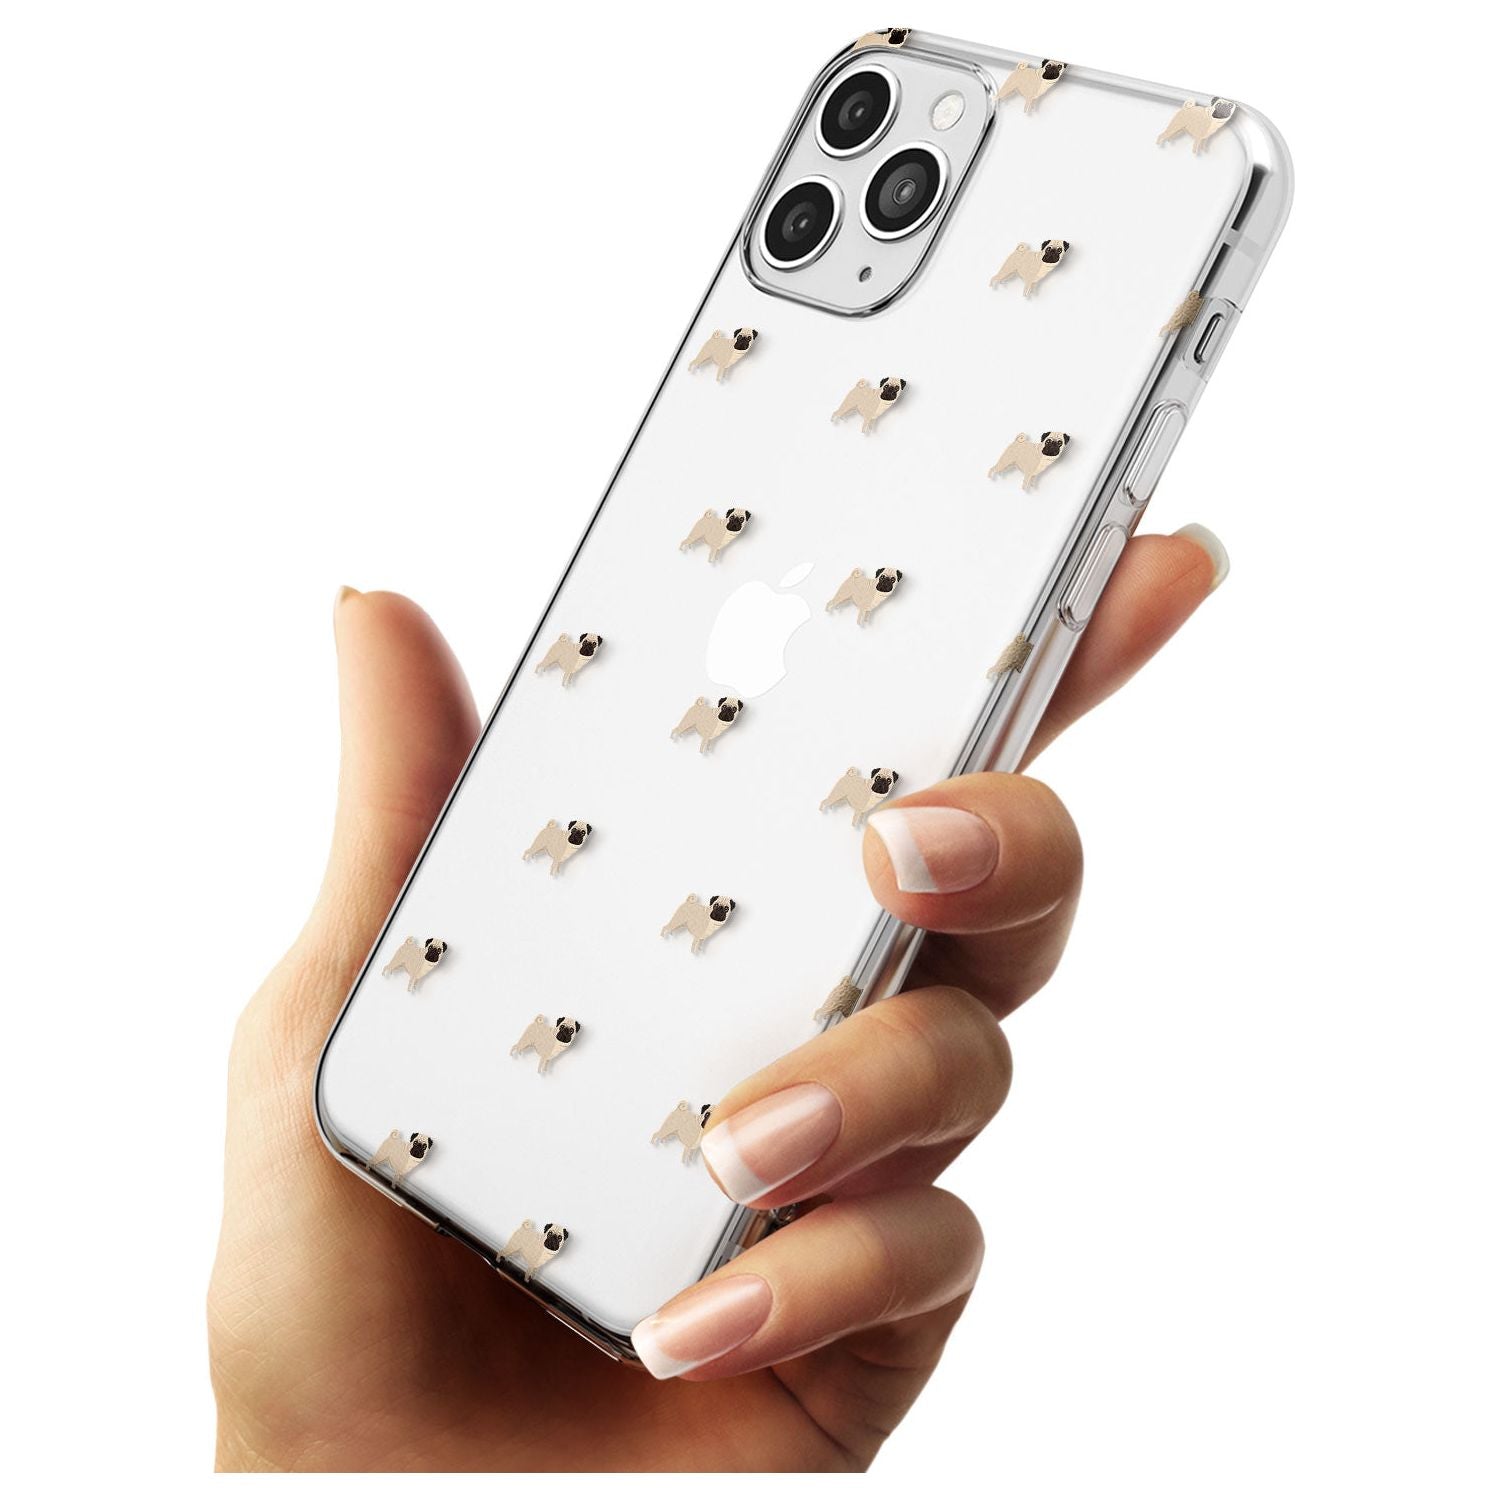 Pug Dog Pattern Clear Slim TPU Phone Case for iPhone 11 Pro Max